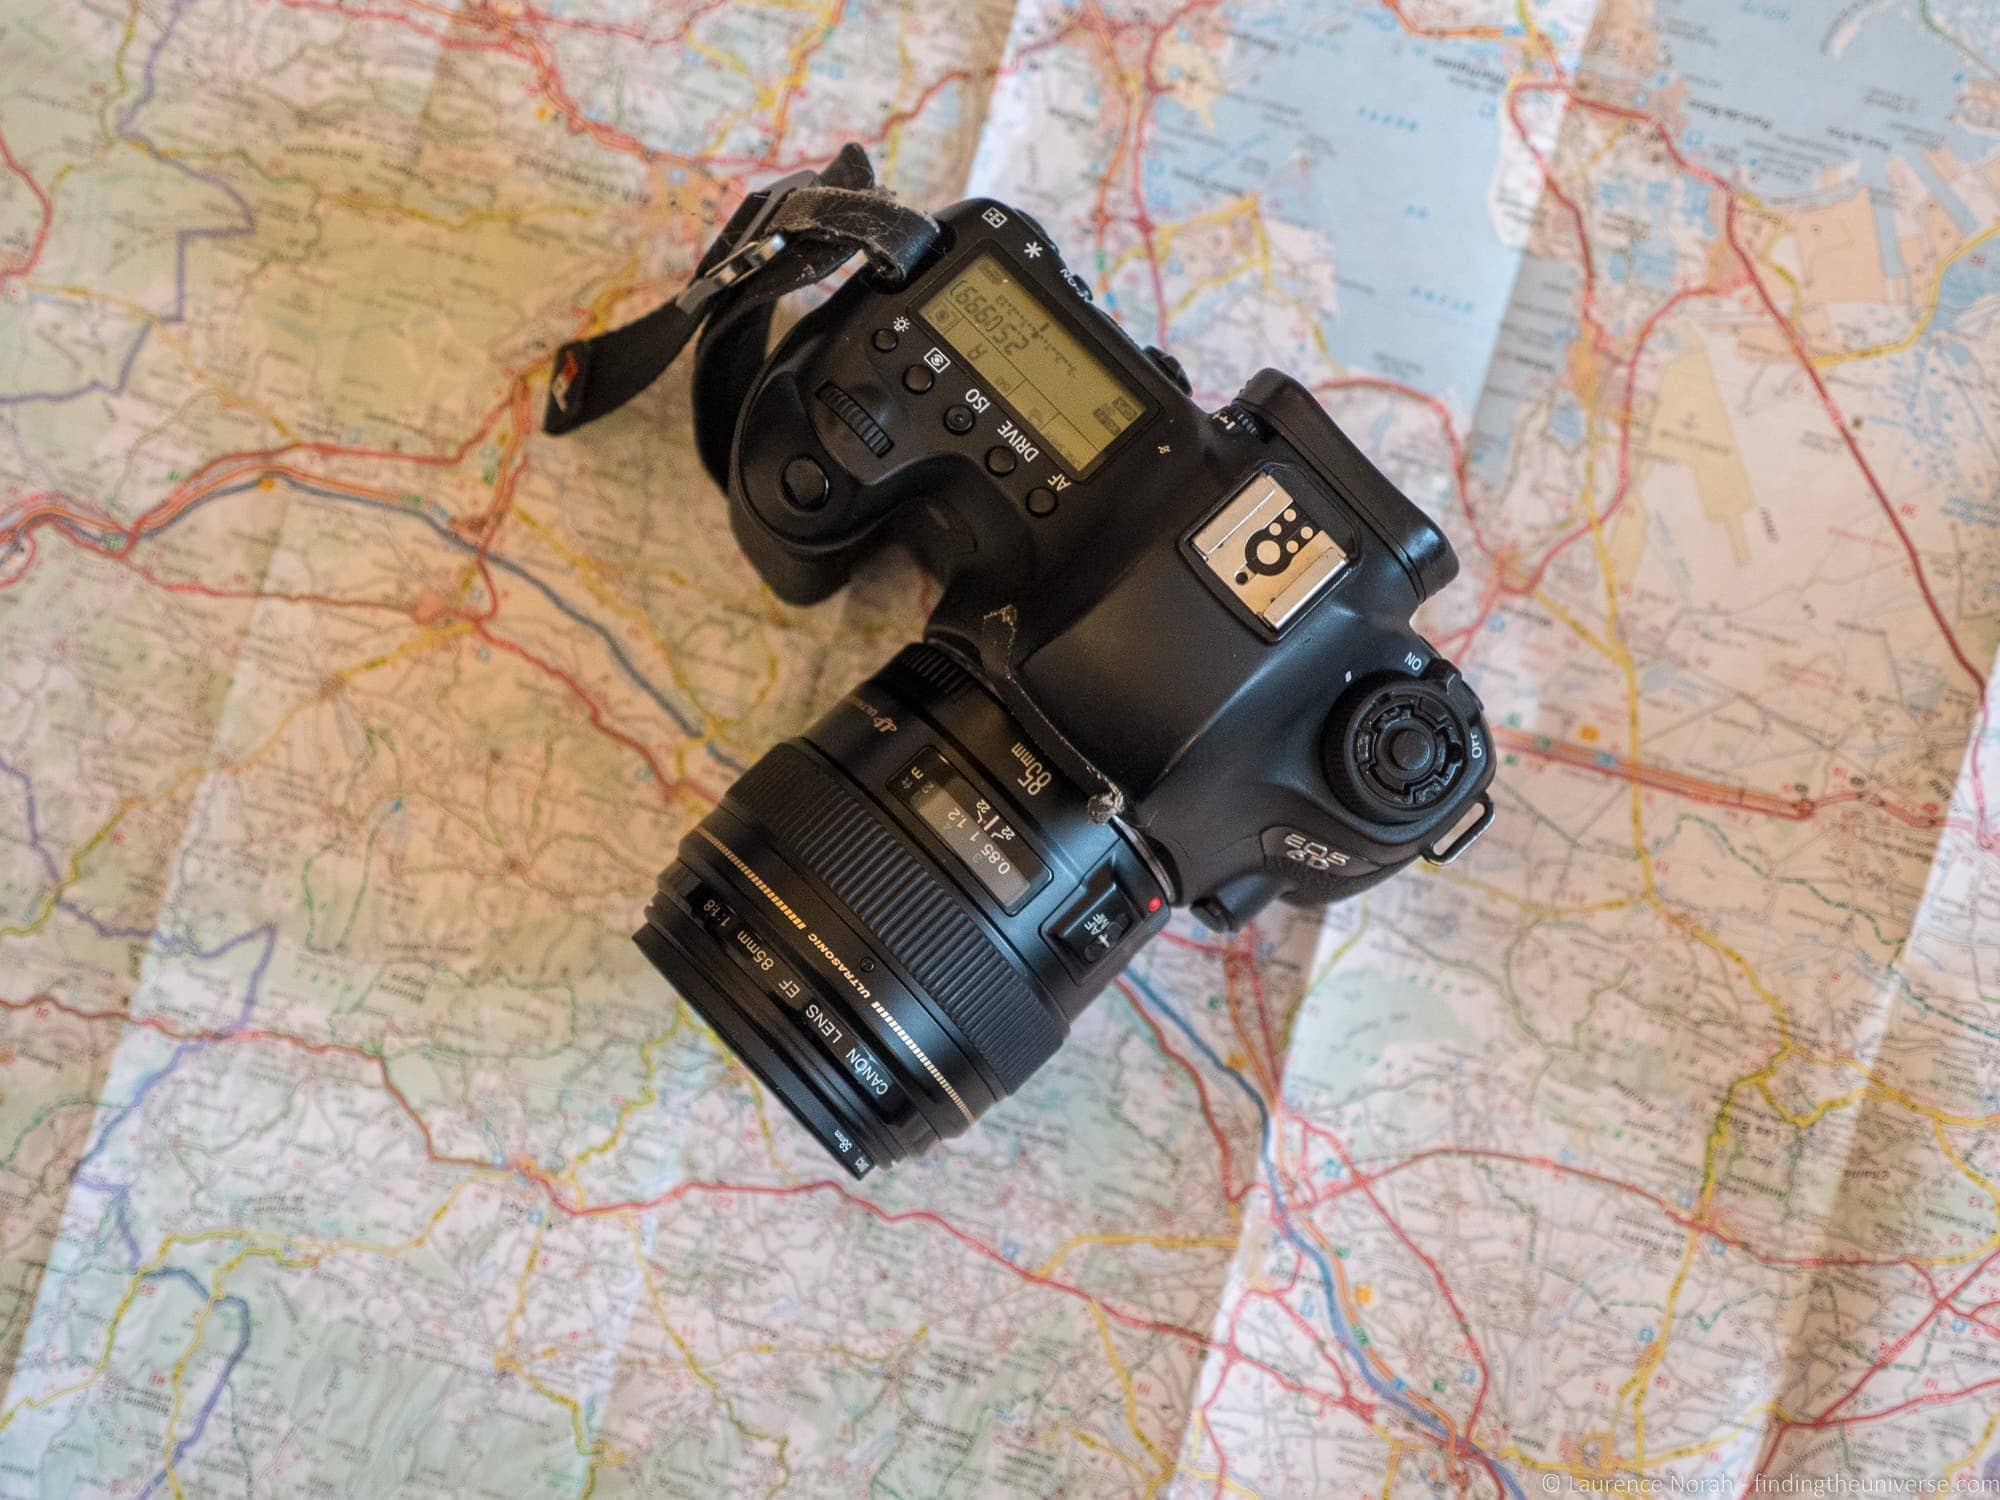 best lens for travel photography